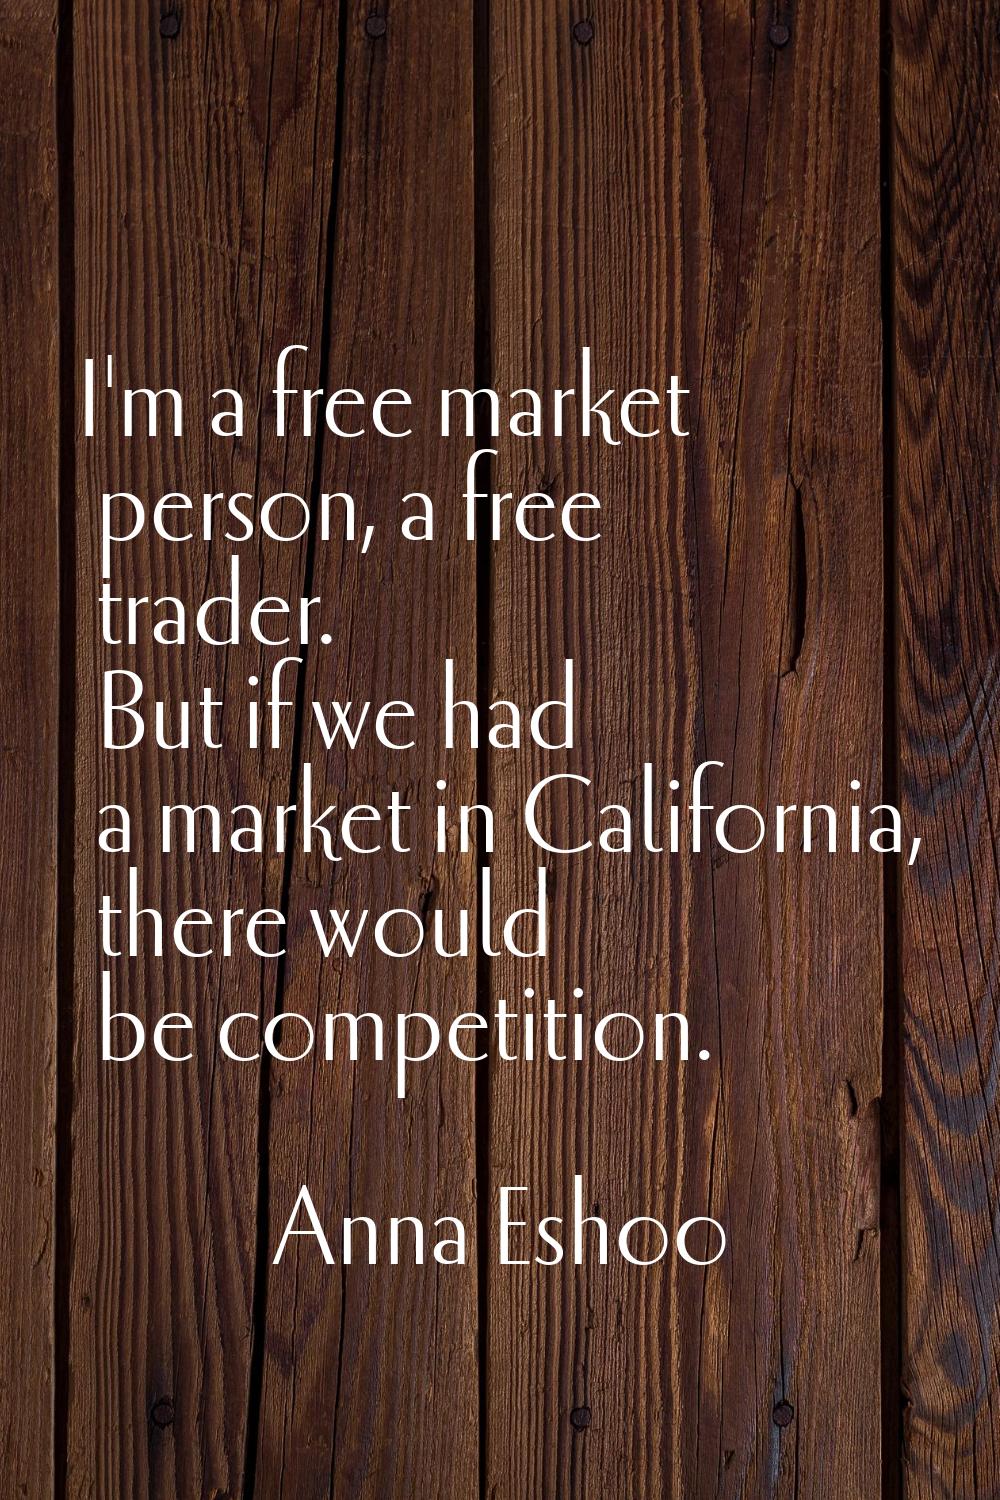 I'm a free market person, a free trader. But if we had a market in California, there would be compe